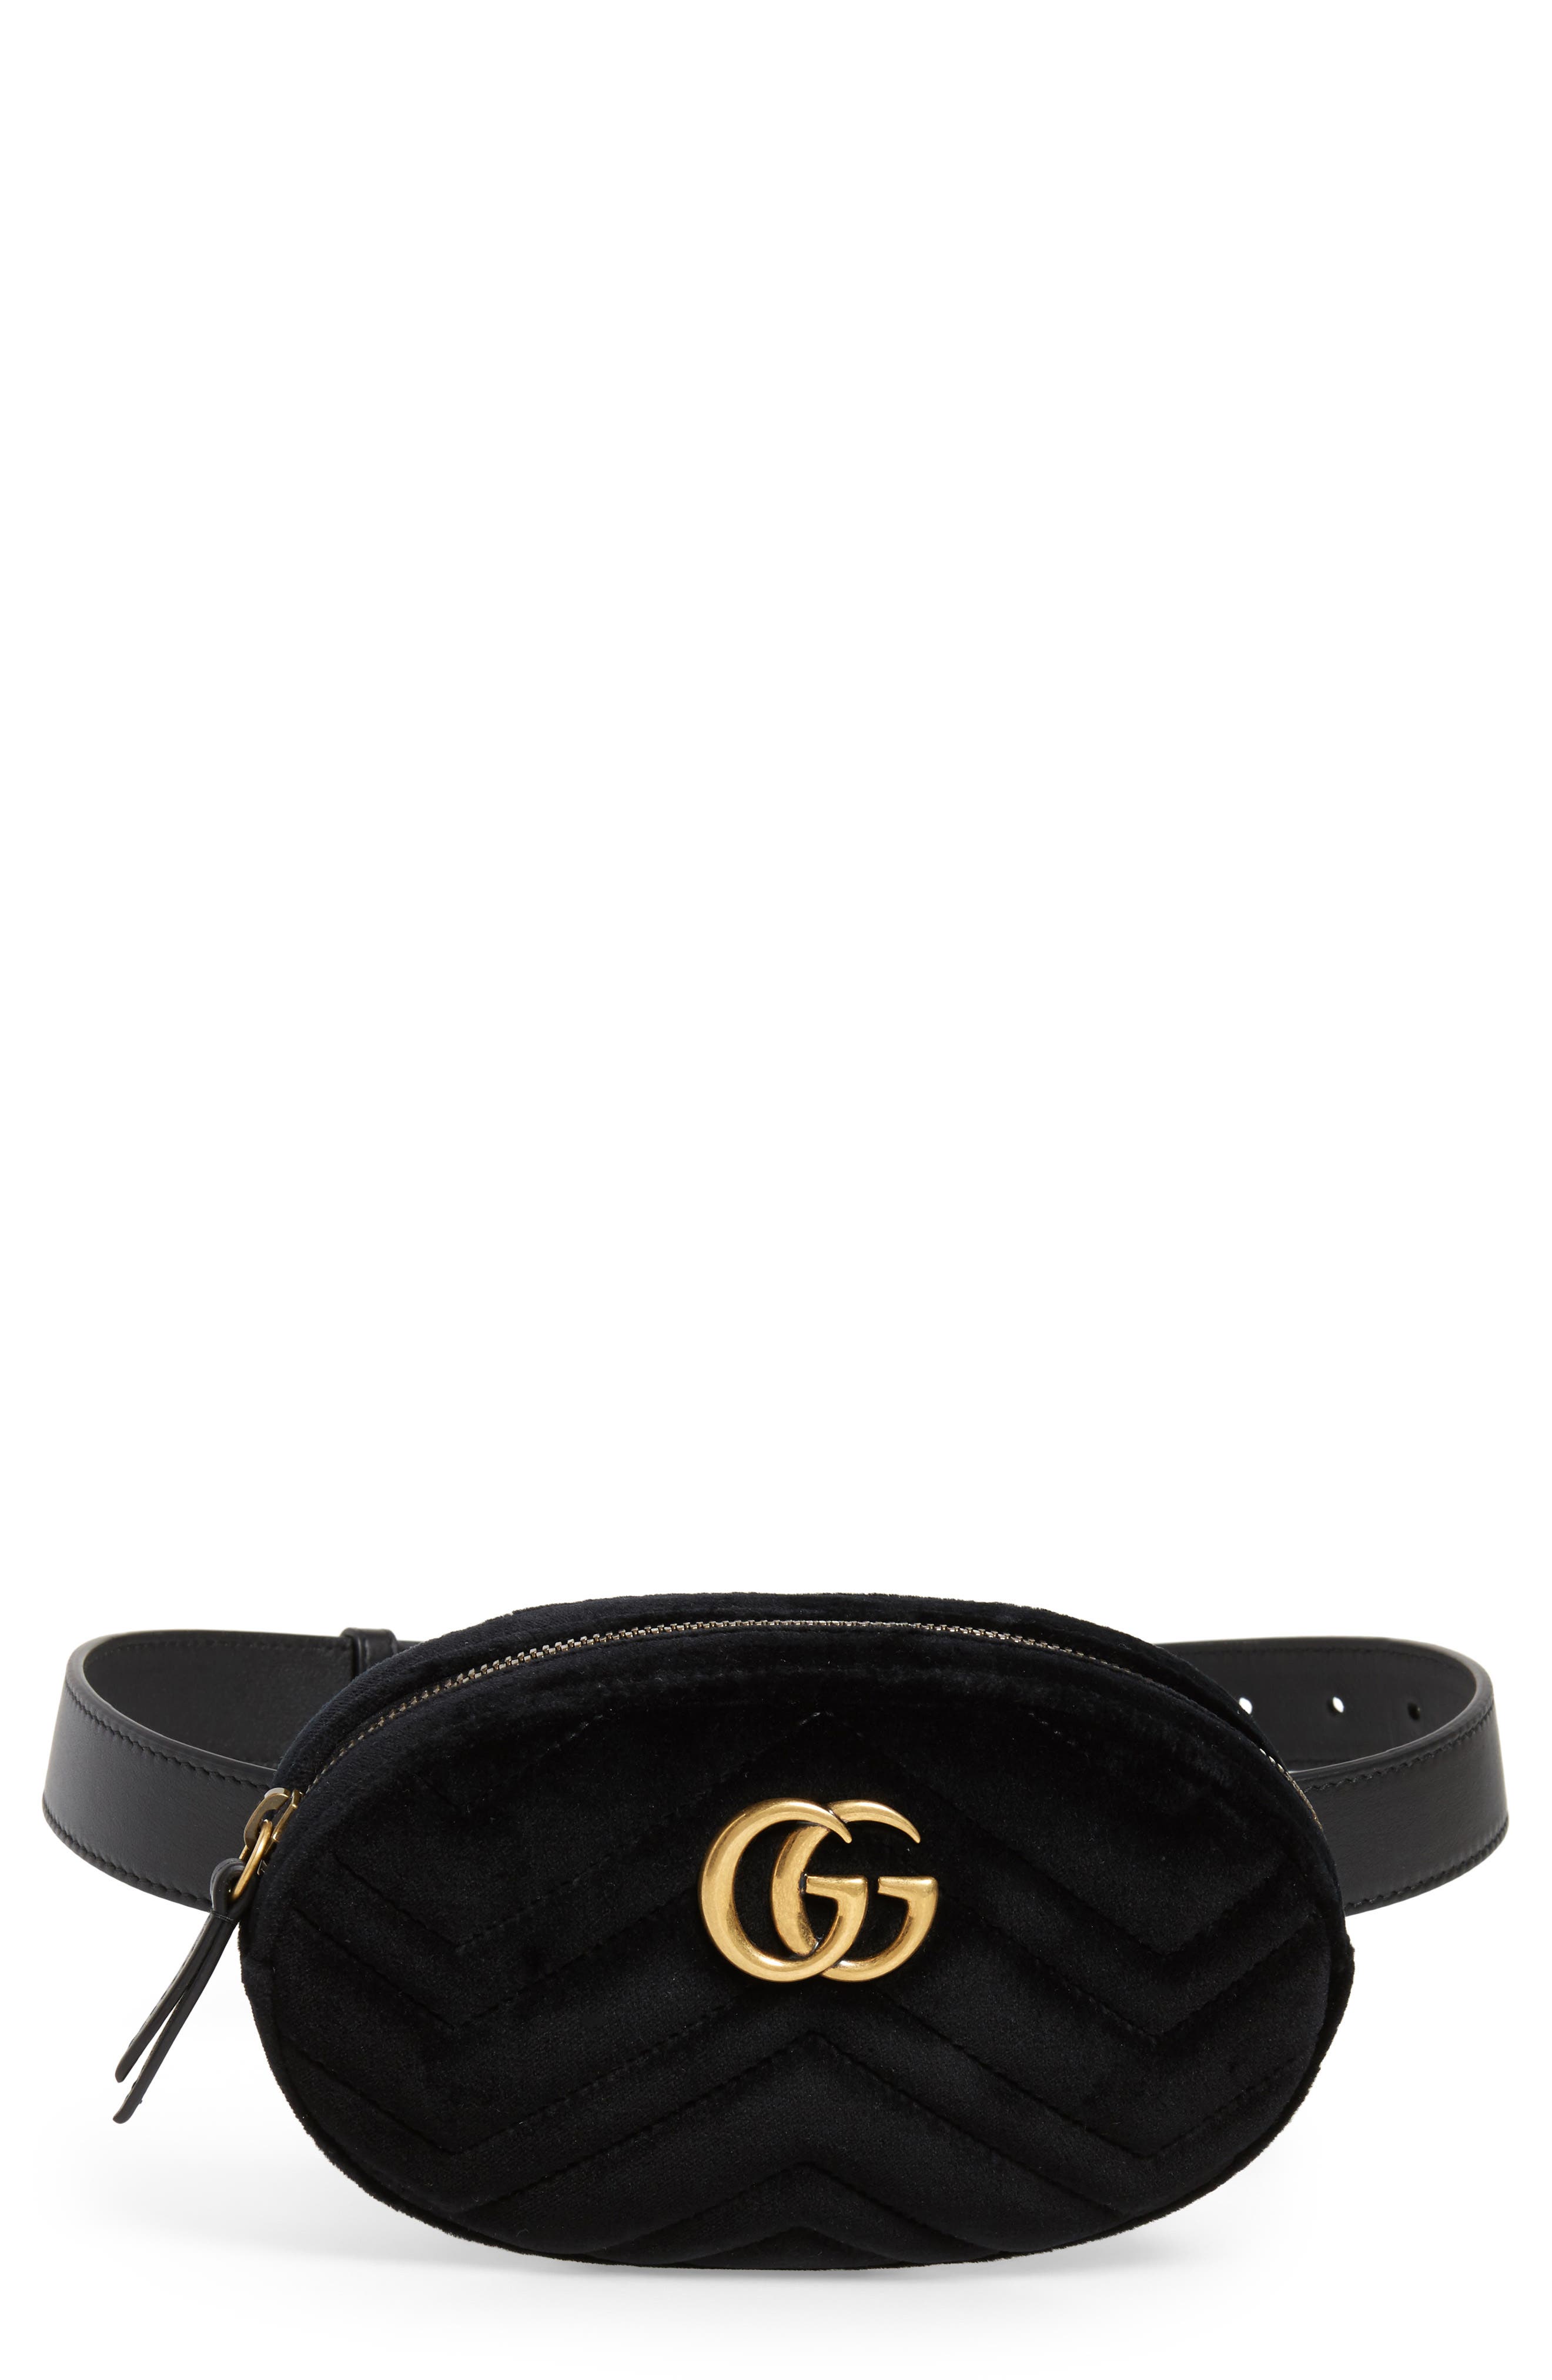 fanny pack gucci cheap